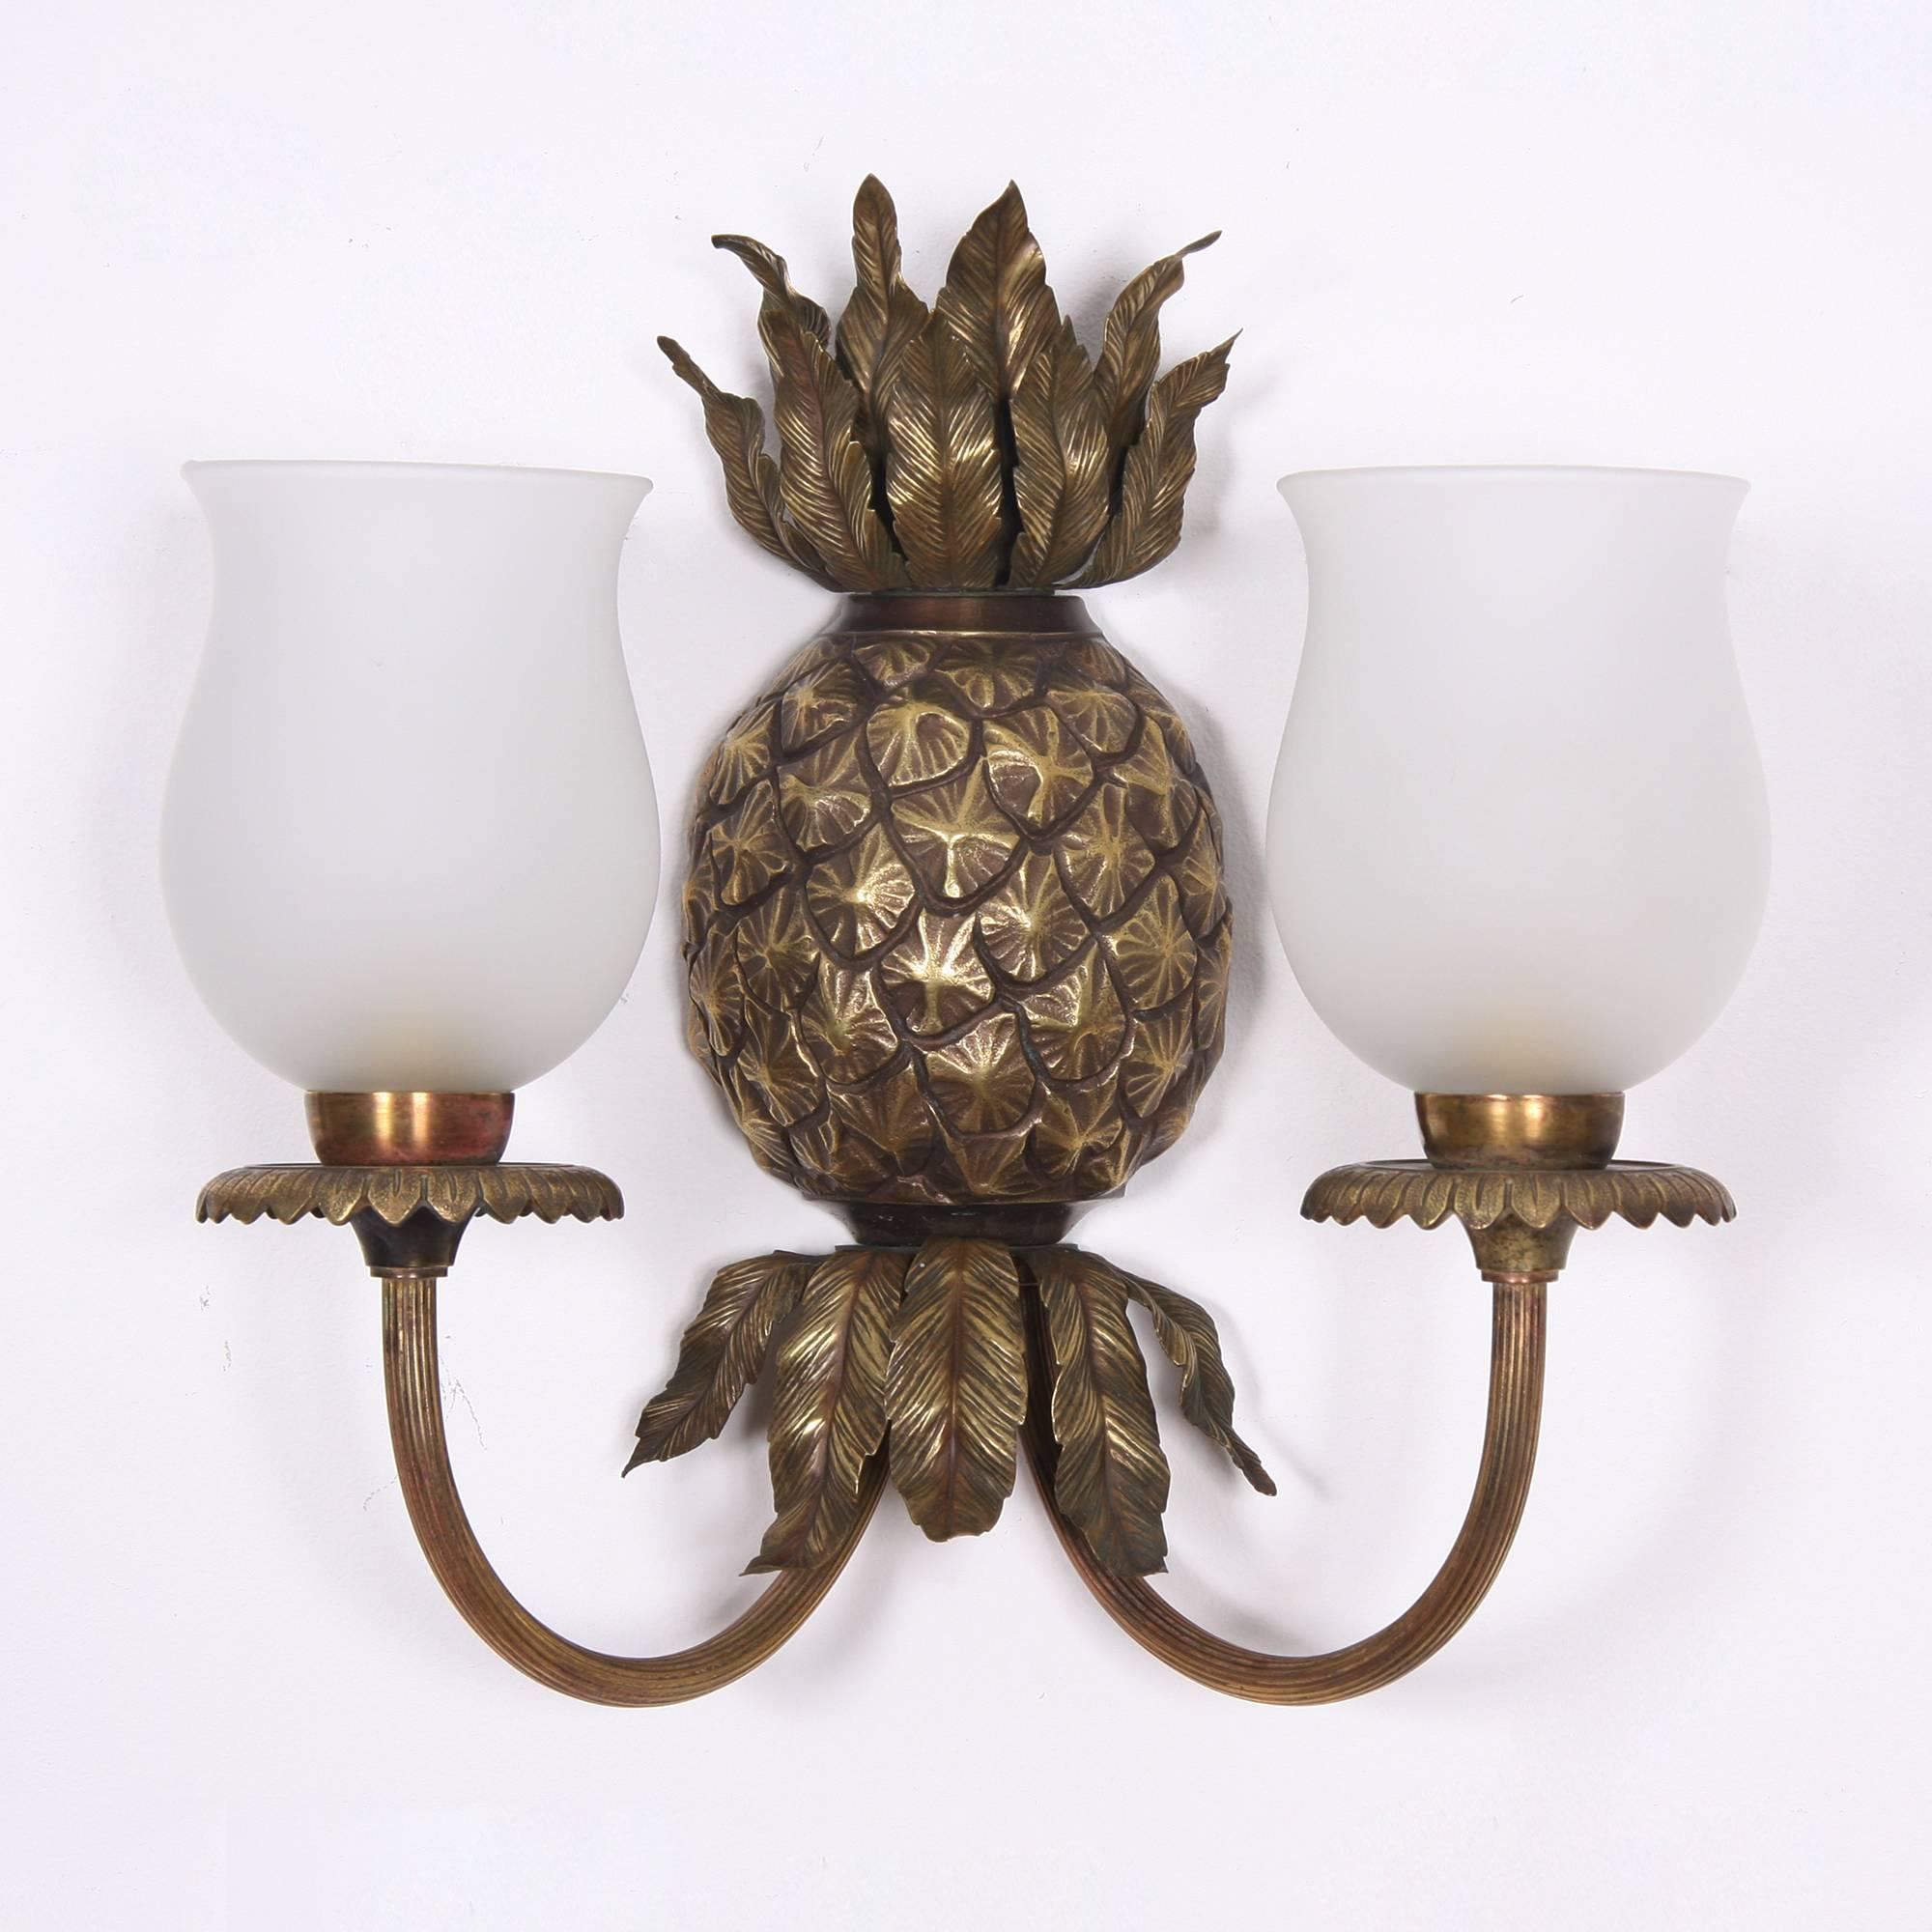 A stunning pair of pineapple wall lights by Maison Charles. Detailed pineapple shape and leaves in brass, with two light fittings each, detailed drip pans with a scalloped edging. Original frosted glass shades. Stamped with maker's mark on the